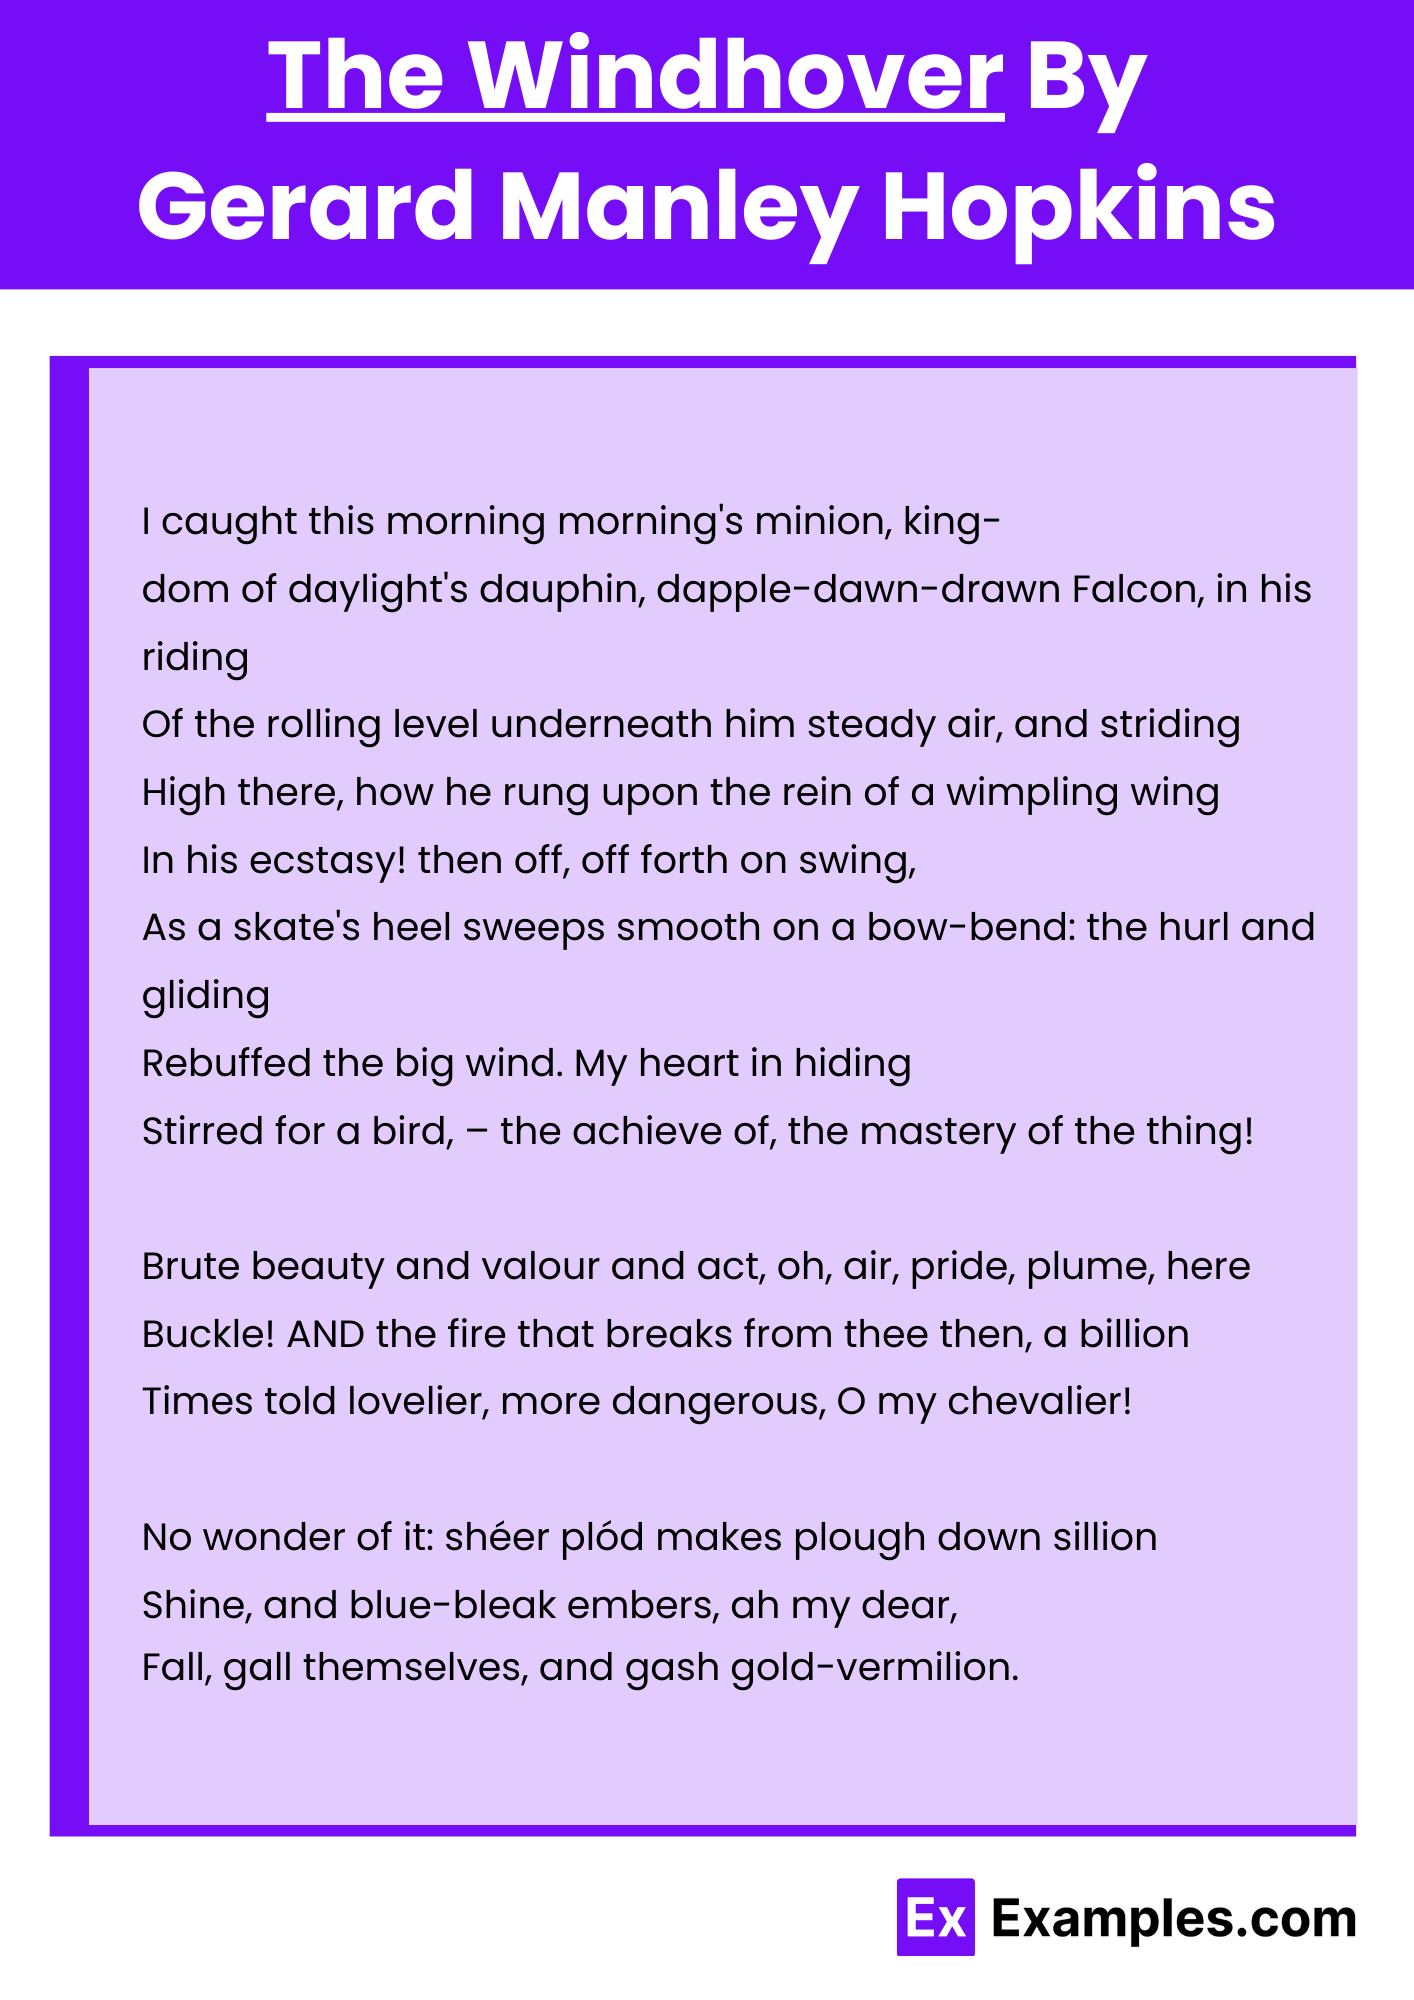 The Windhover By Gerard Manley Hopkins